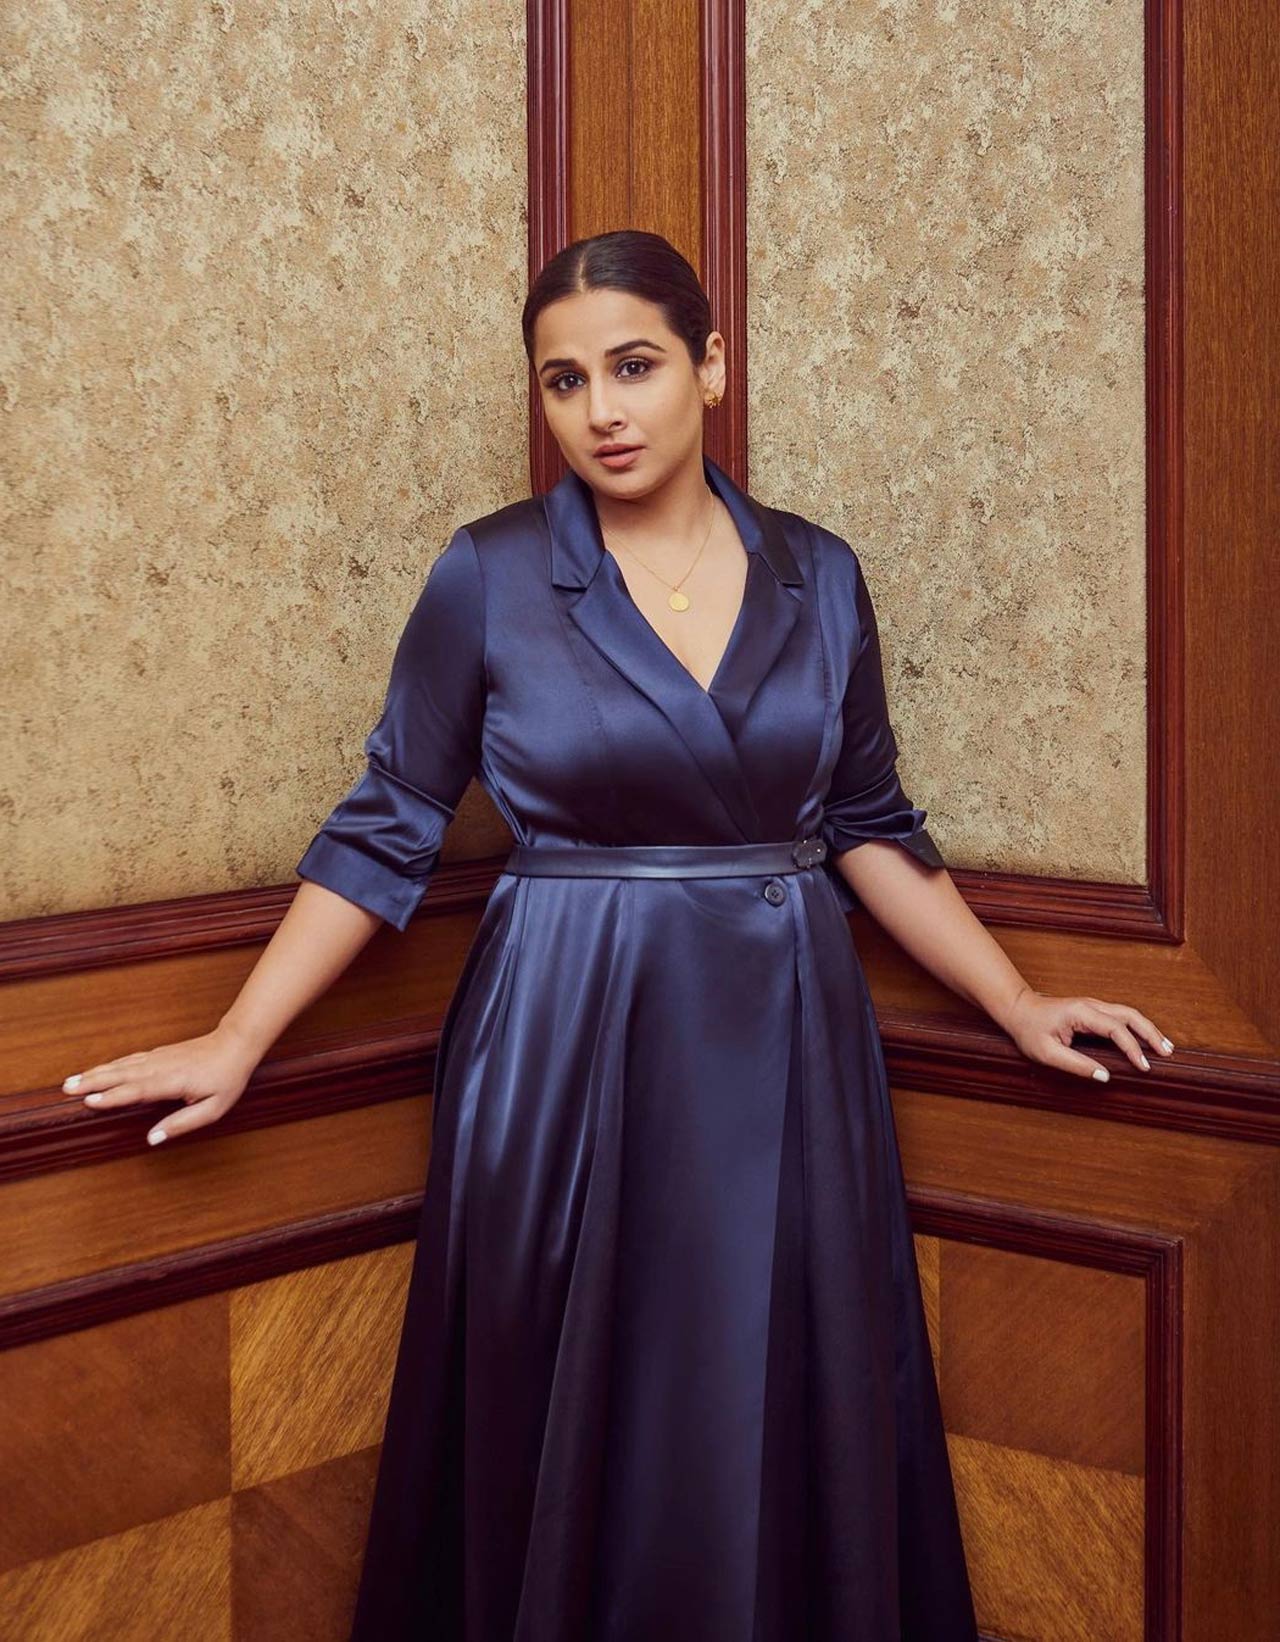 Vidya Balan started her career with the Indian sitcom 'Hum Paanch' in 1995. The actress played the role of Radhika Mathur on the show. Ahead of its success, she debuted in the film industry with the Bengali film 'Bhalo Theko' and in the Hindi film industry with 'Parineeta' along with Saif Ali Khan. Post that, there has been no looking back for the actress